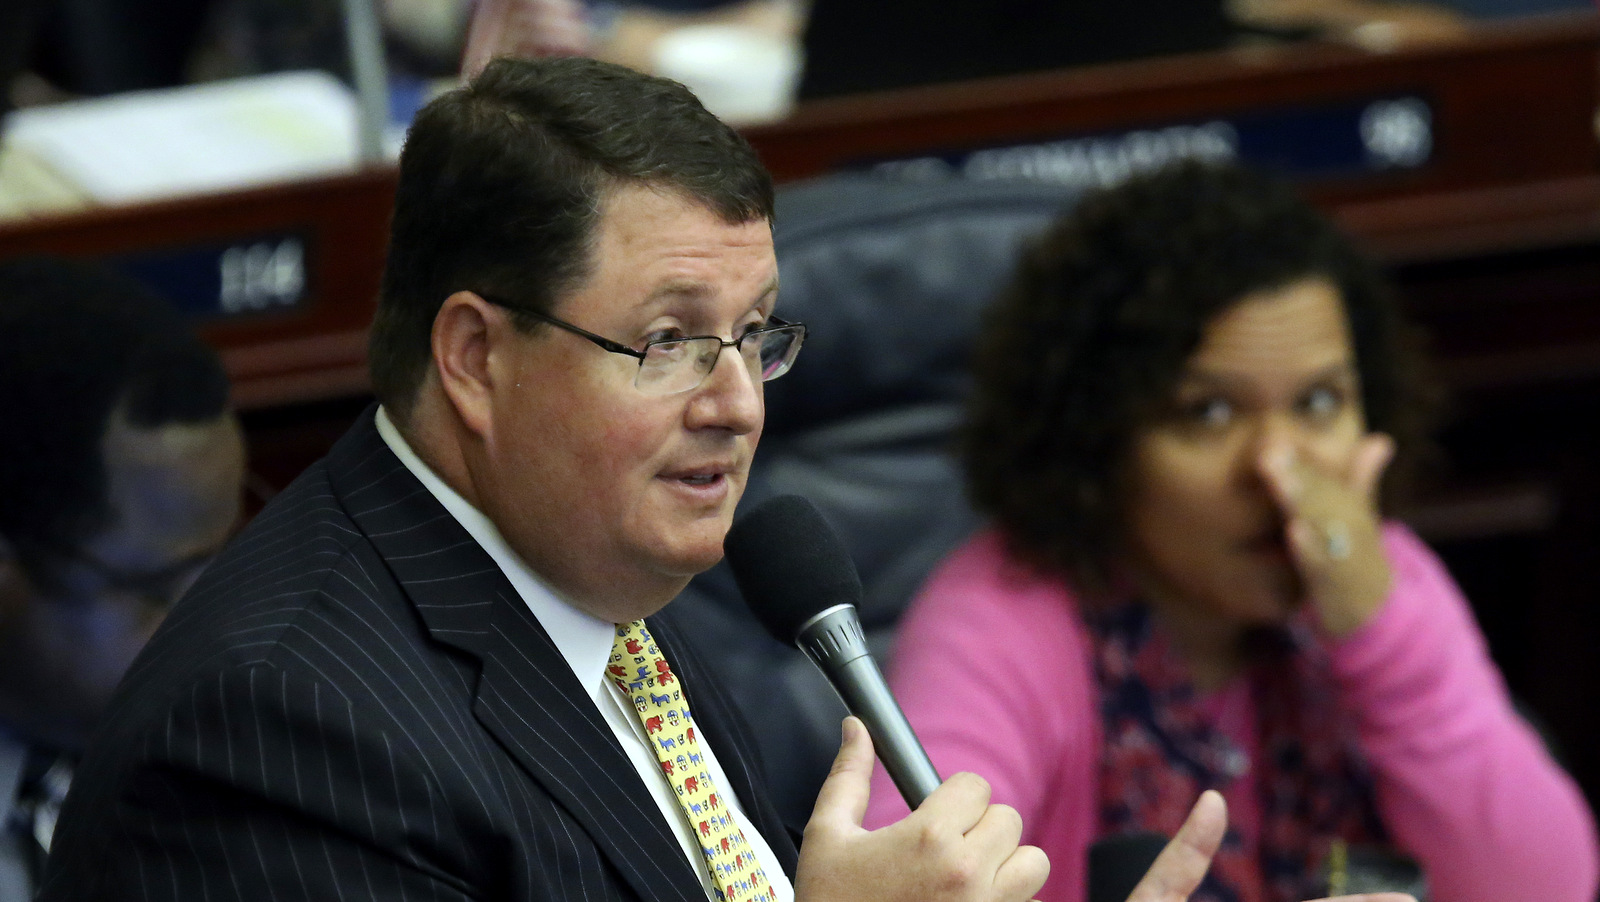 Florida Rep. Randy Fine, R-debates on the invest Florida section of the budget, June 9, 2017. (AP/Steve Cannon)